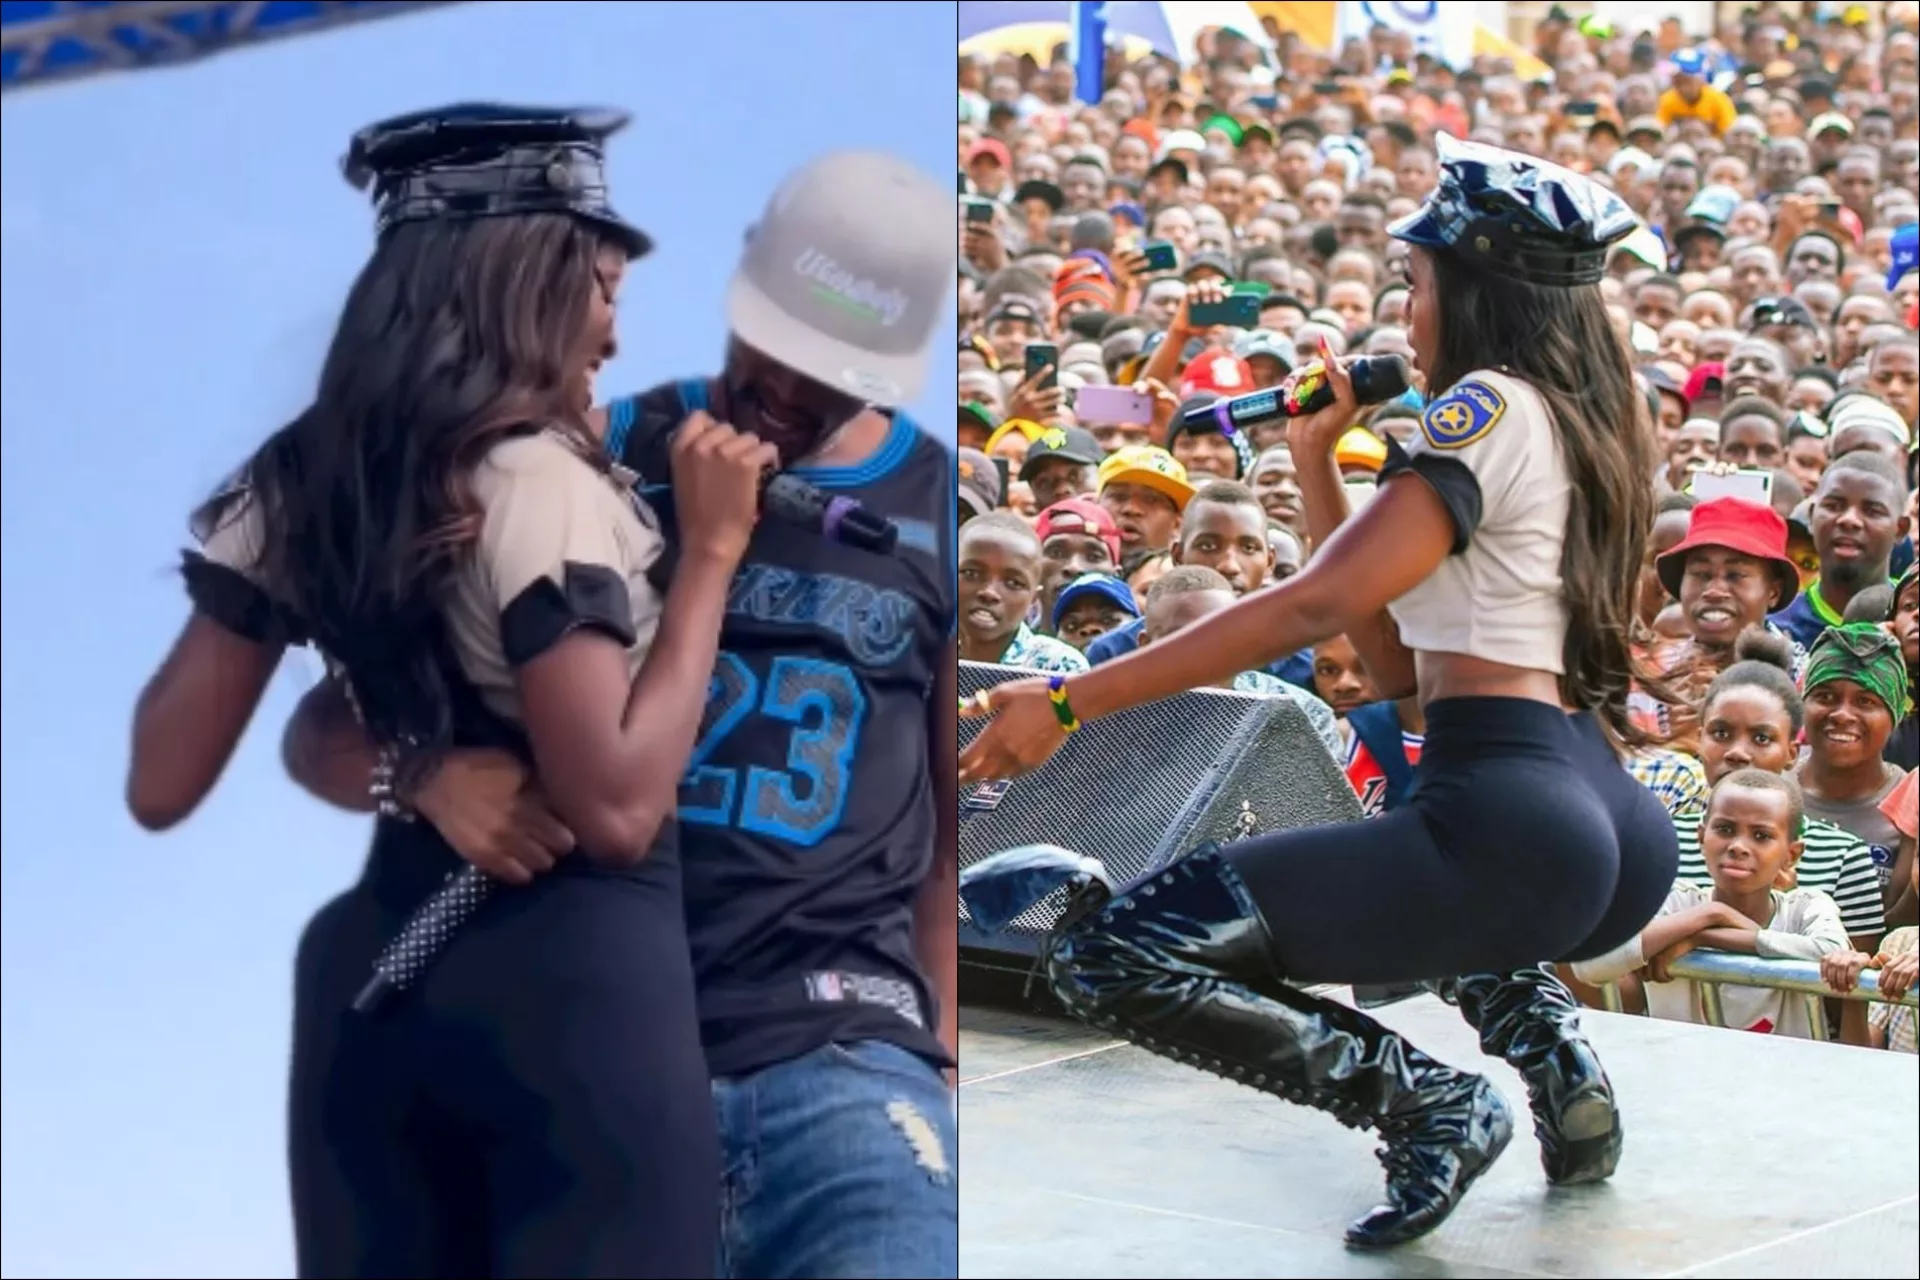 Tanzanian fast rising Bongo star Phina has once again found herself trending on social media gor allegedly enhancing her nyash to look big. In a recent performance, Phina donning tight pants that left netizens with a clear view of her nyash. While reacting to her photos, a section of her fans noted that her 'sitting allowance' had grown at an alarming rate. A section have been speculating that the 'upo nyonyo' hitmaker underwent gluteal augmentation to improve her shape. In a recent interview, Phina denied the allegations of enhancing her body shape adding that she is naturally gifted. She also said that the tight pants she was wearing made her nyash protrude during the performance. "It is not true. I ignore all the trolls..because God took his time to create me. My nyash is all natural. I am at peace because I know it's real." Phina is also making waves in East Africa music landscape. She has released a new EP consisting of three songs; Zinduna, Smile and Rara featuring Juma Jux. The Upo Nyonyo singer has three new songs: Zinduna, Smile and Rara featuring Juma Jux.